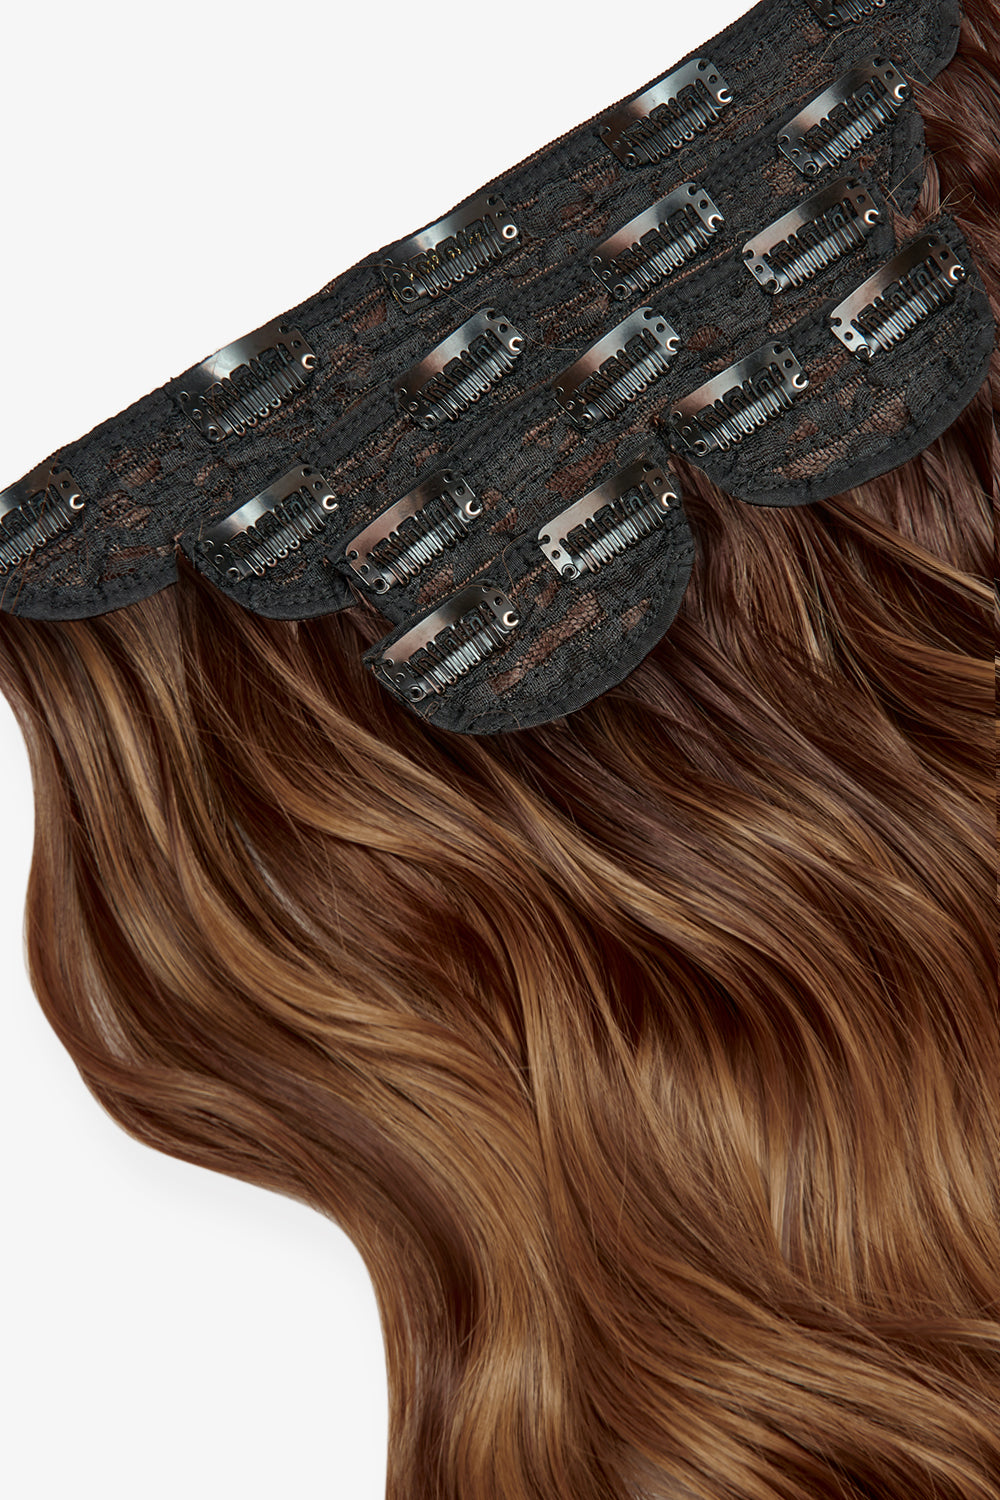 Super Thick 22’’ 5 Piece Brushed Out Wave Clip In Hair Extensions - Rooted Mellow Brown